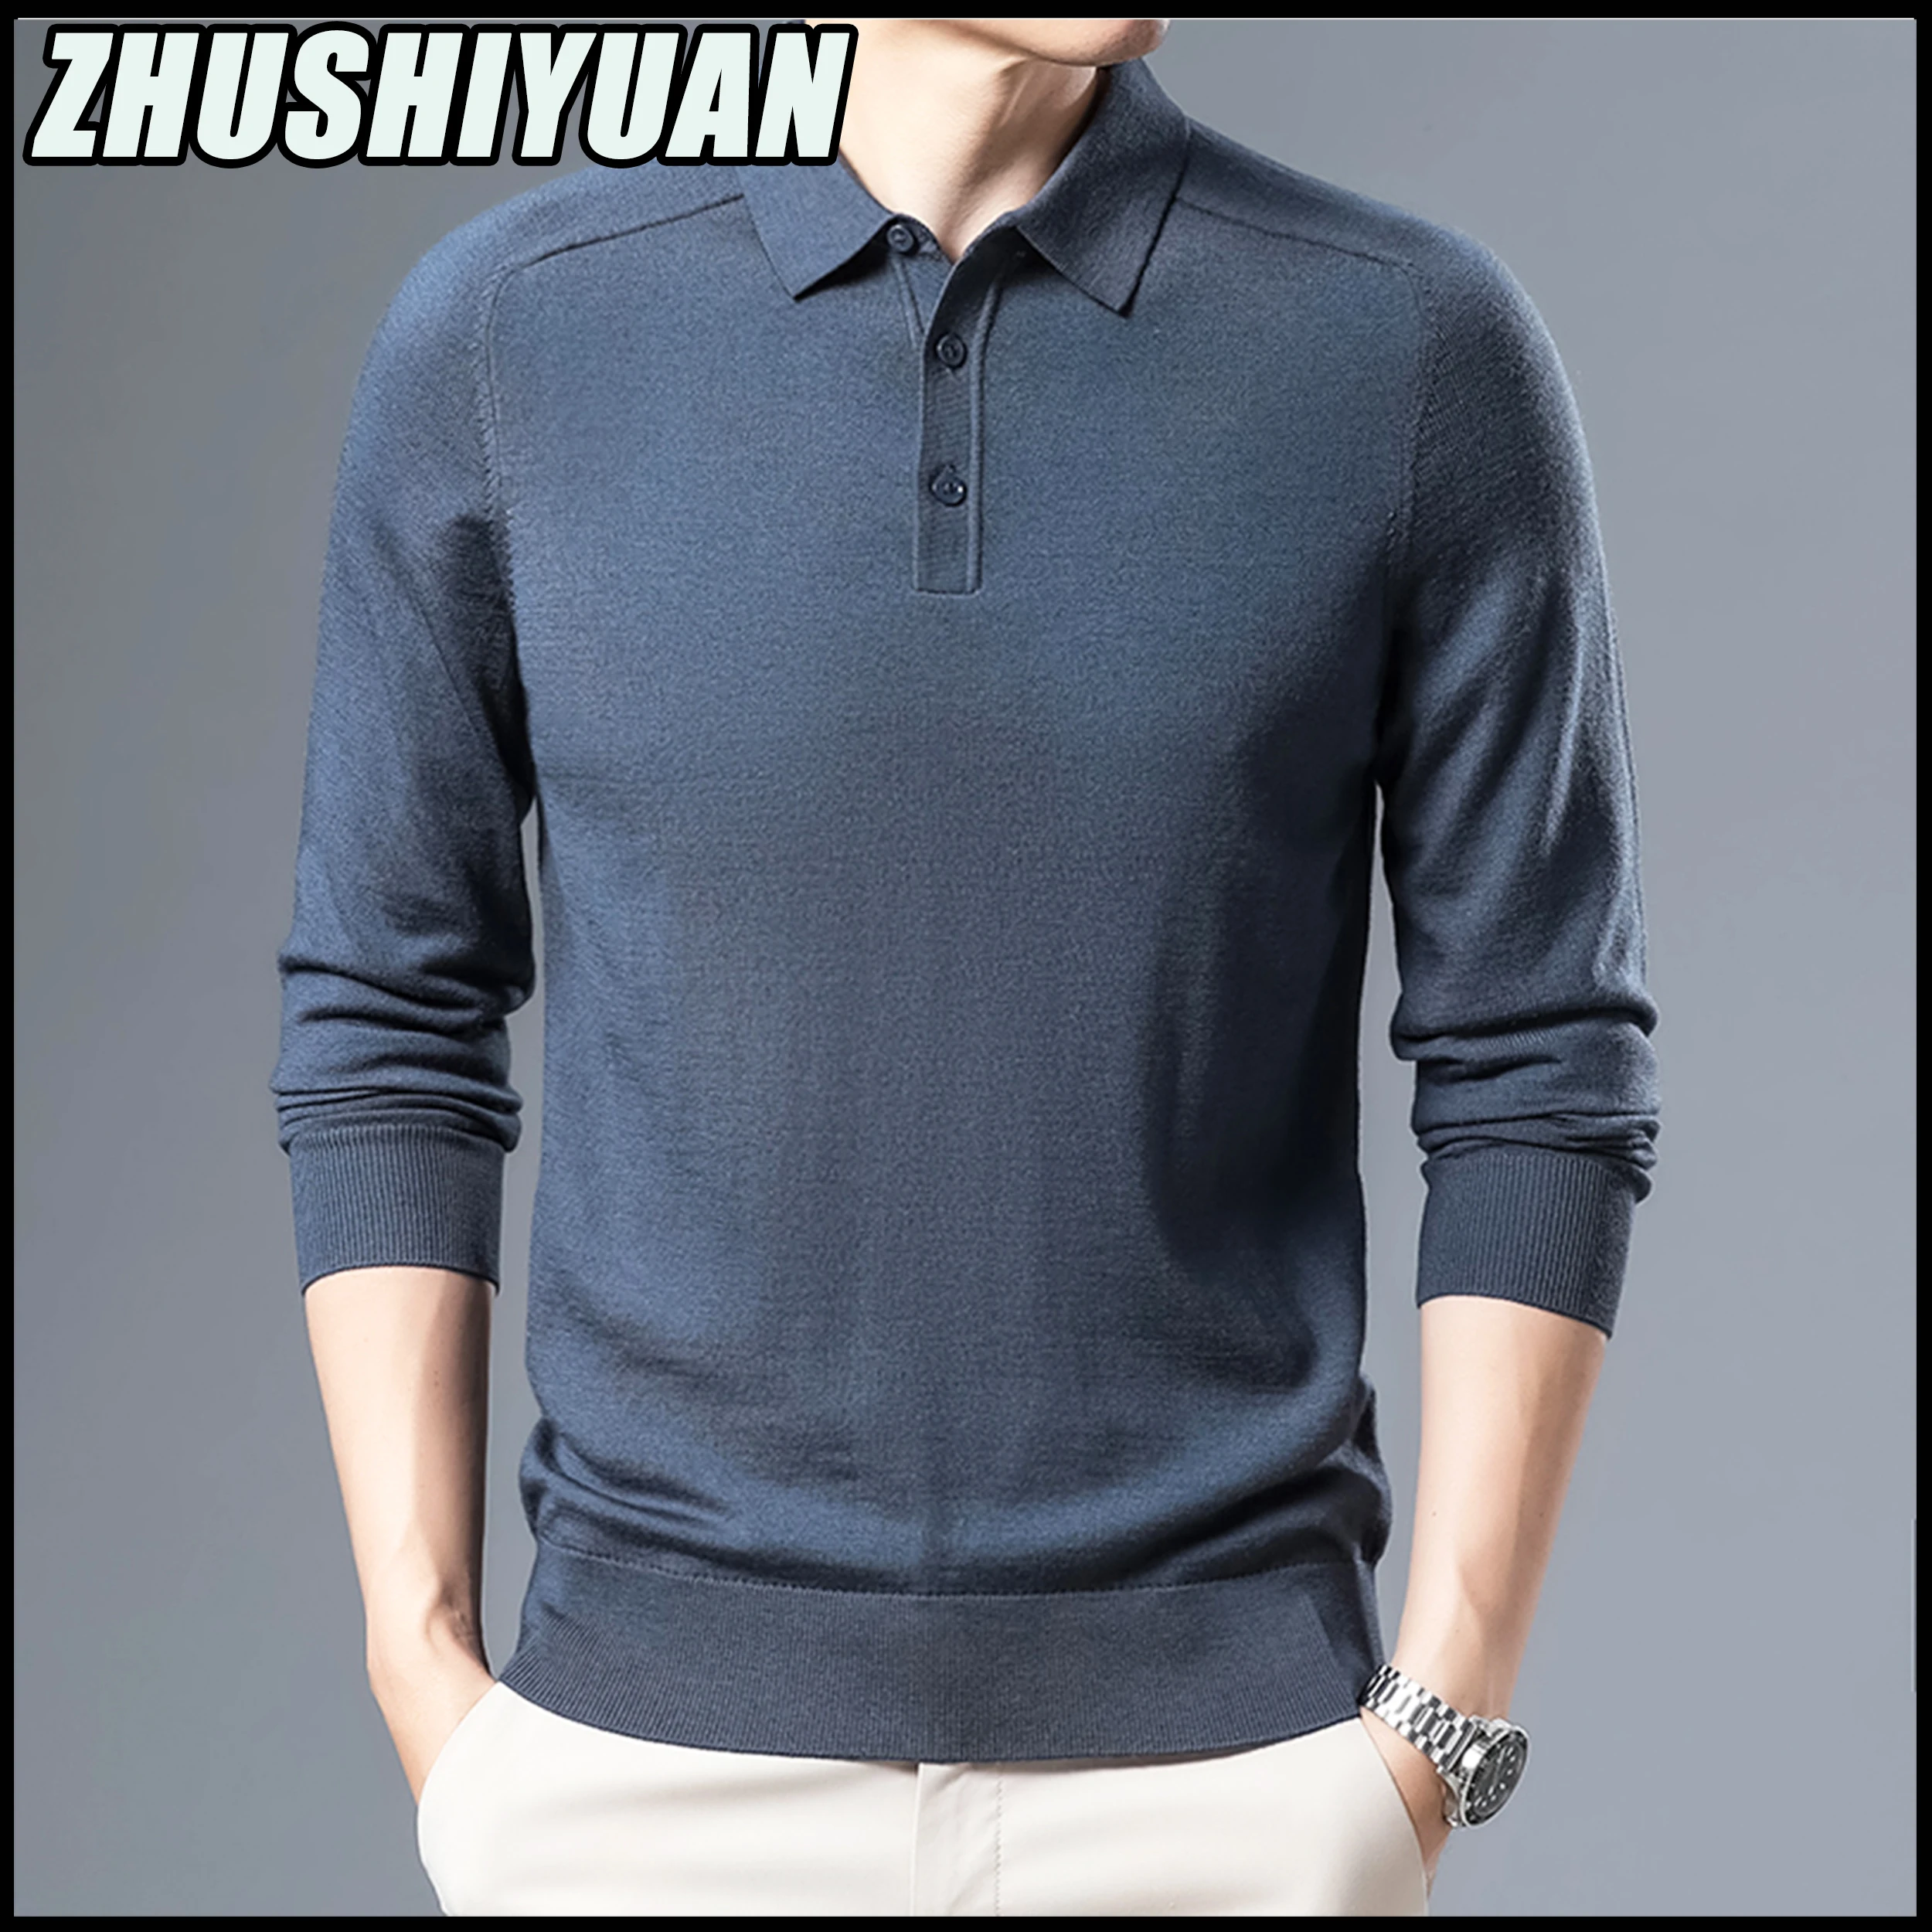 High Quality Sweaters For Men Wool Cashmere Knitwear Pullovers Roupa Masculina Korean Fashion Men's Clothing Casual Warm Jumper